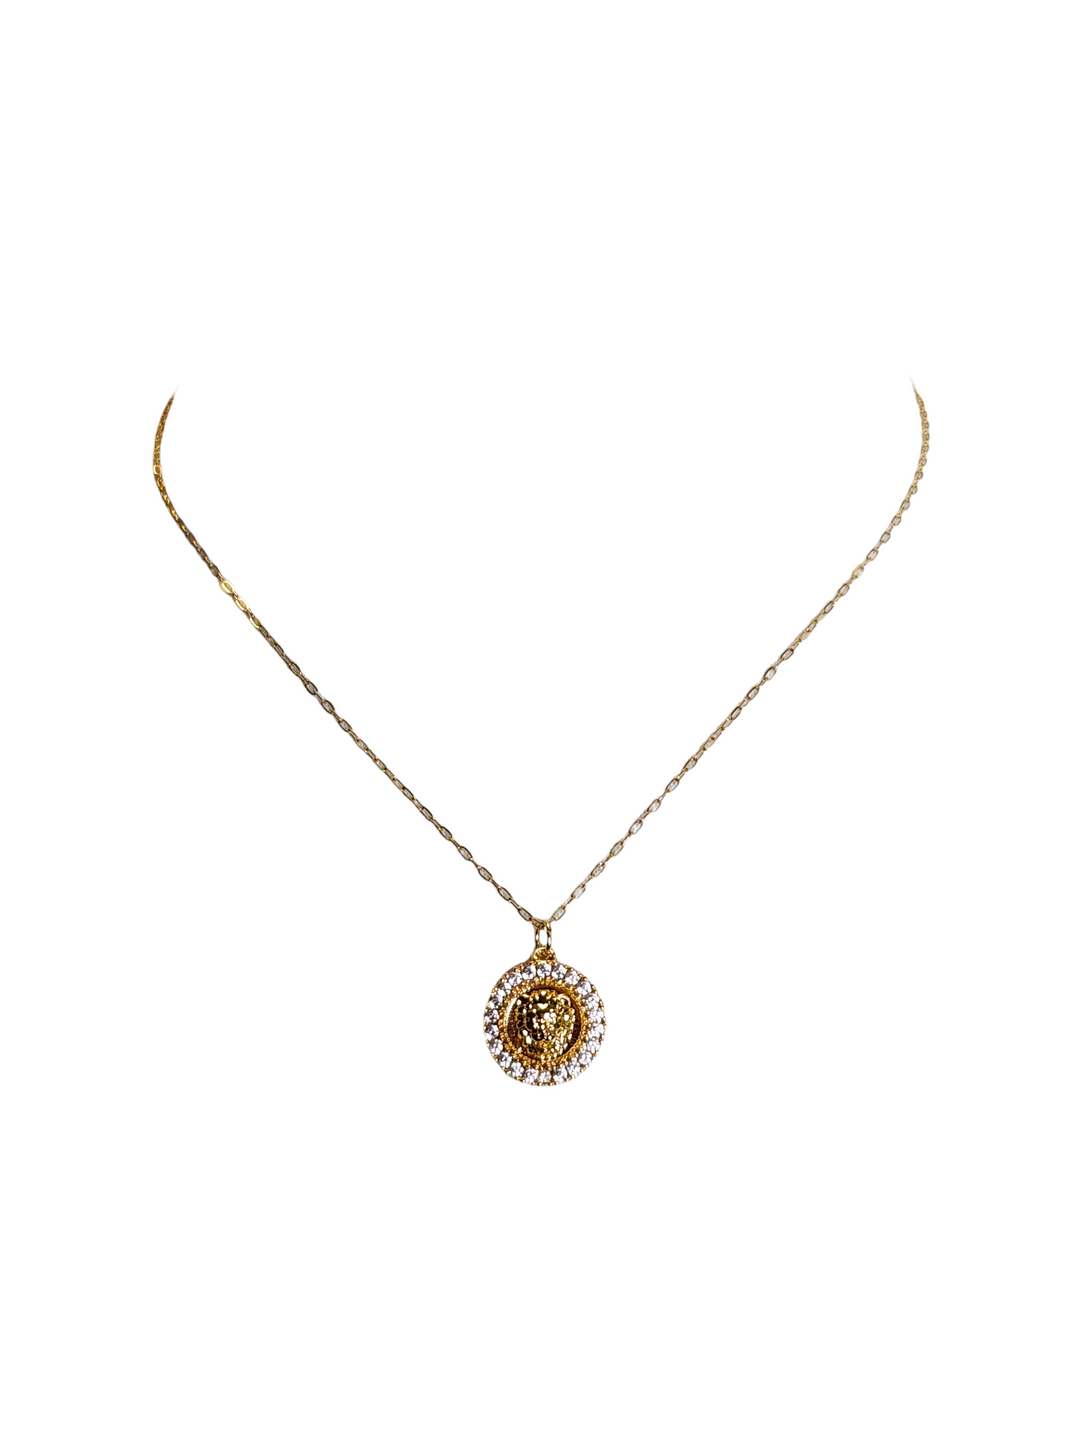 The Daff Lion Head Pave Necklace